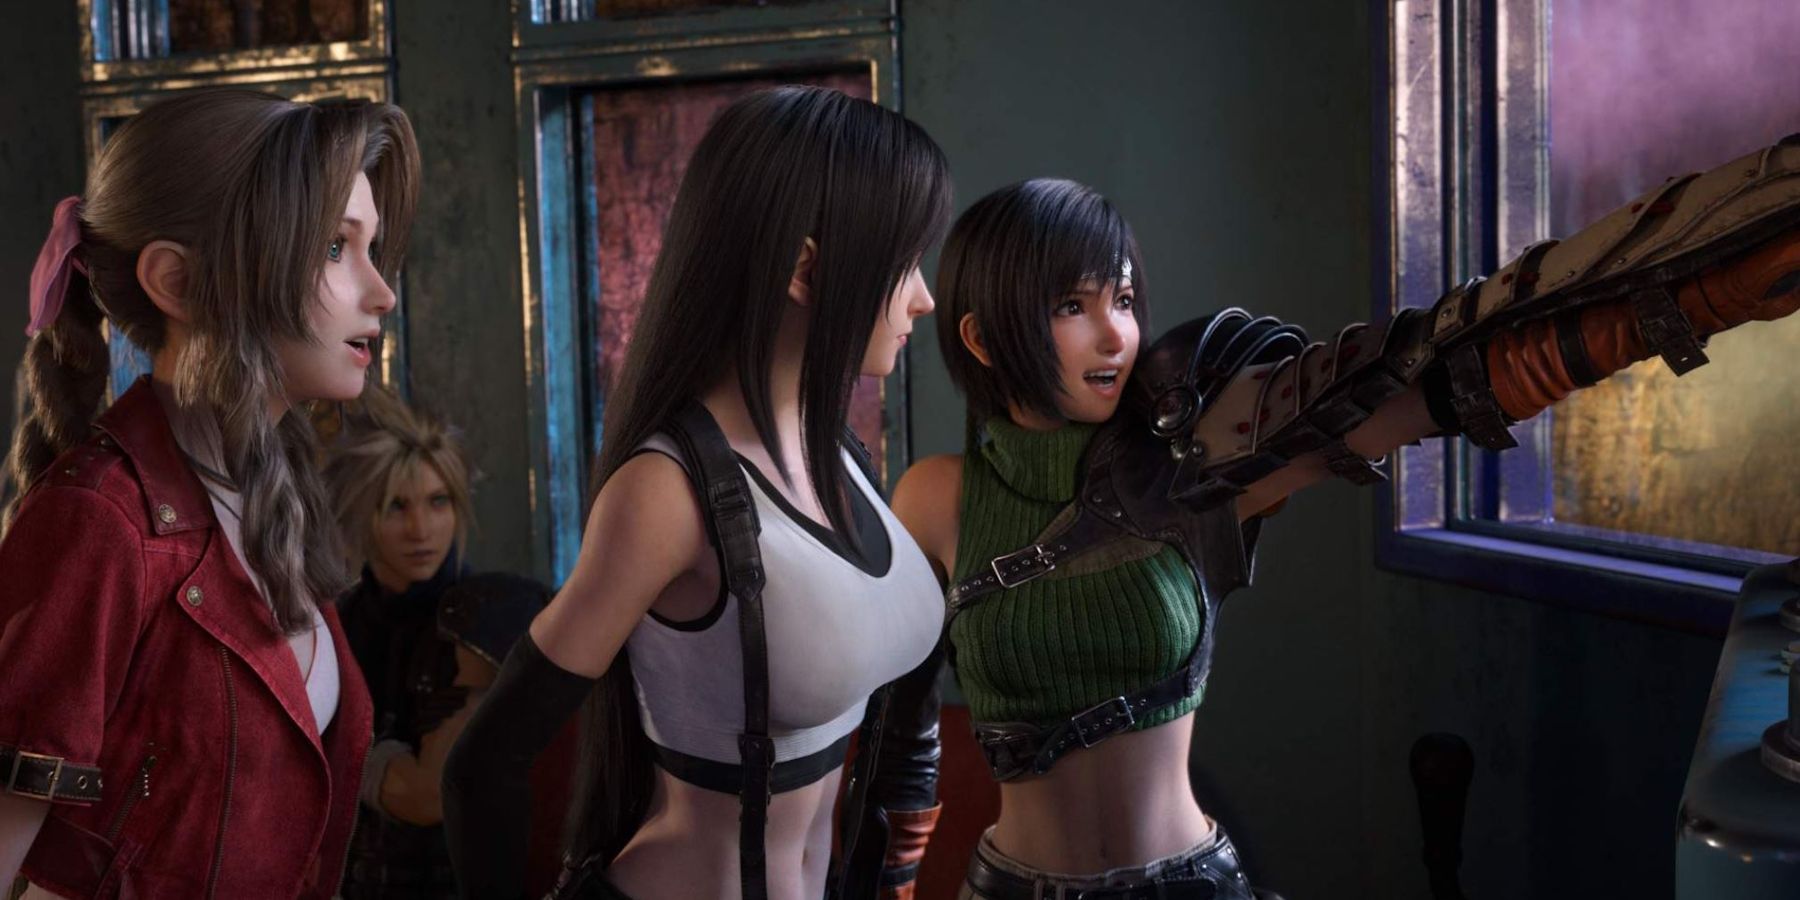 Yuffie points at something offscreen, while Tifa and Aerith look on beside her. Behind the three Cloud can also be seen.